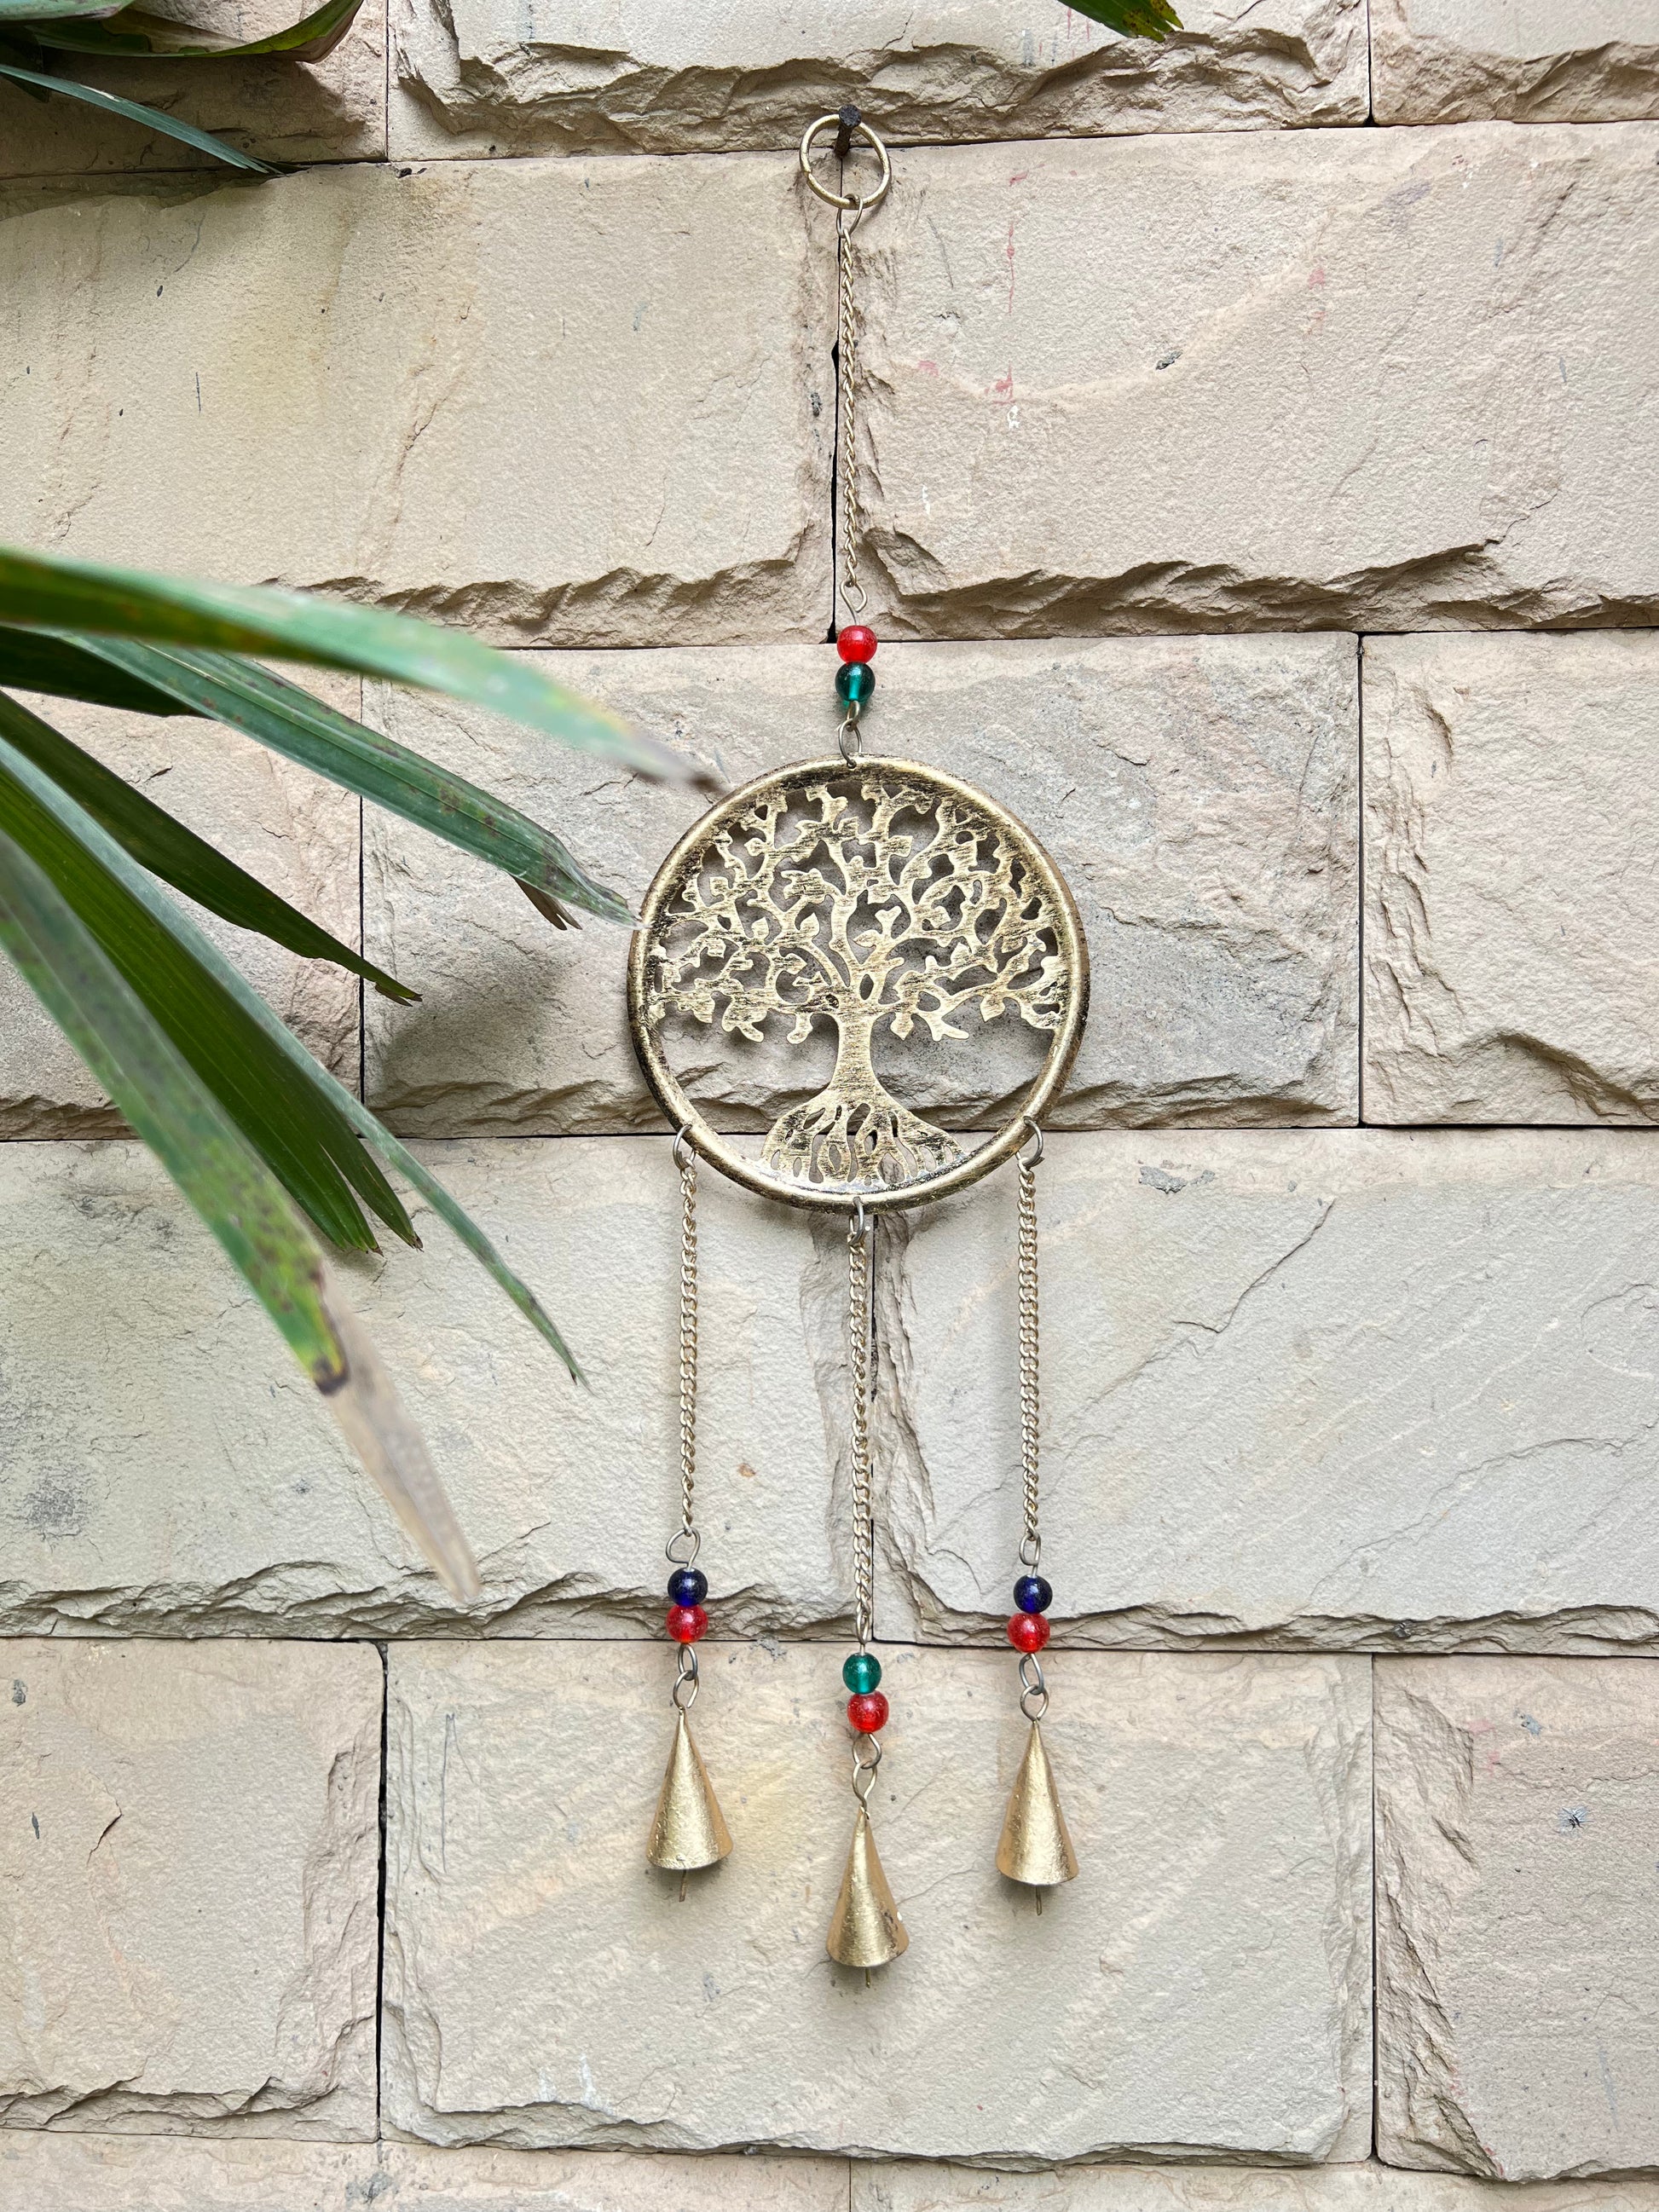 Image of Elegant and traditional Iron Tree Wall Hanging.  The Source India is an Indian Handicraft, Home Decor, Furnishing and Textiles Store. Based out of Hauz Khas Village New Delhi, each piece is carefully procured to allow the enhancement of India's Culture.